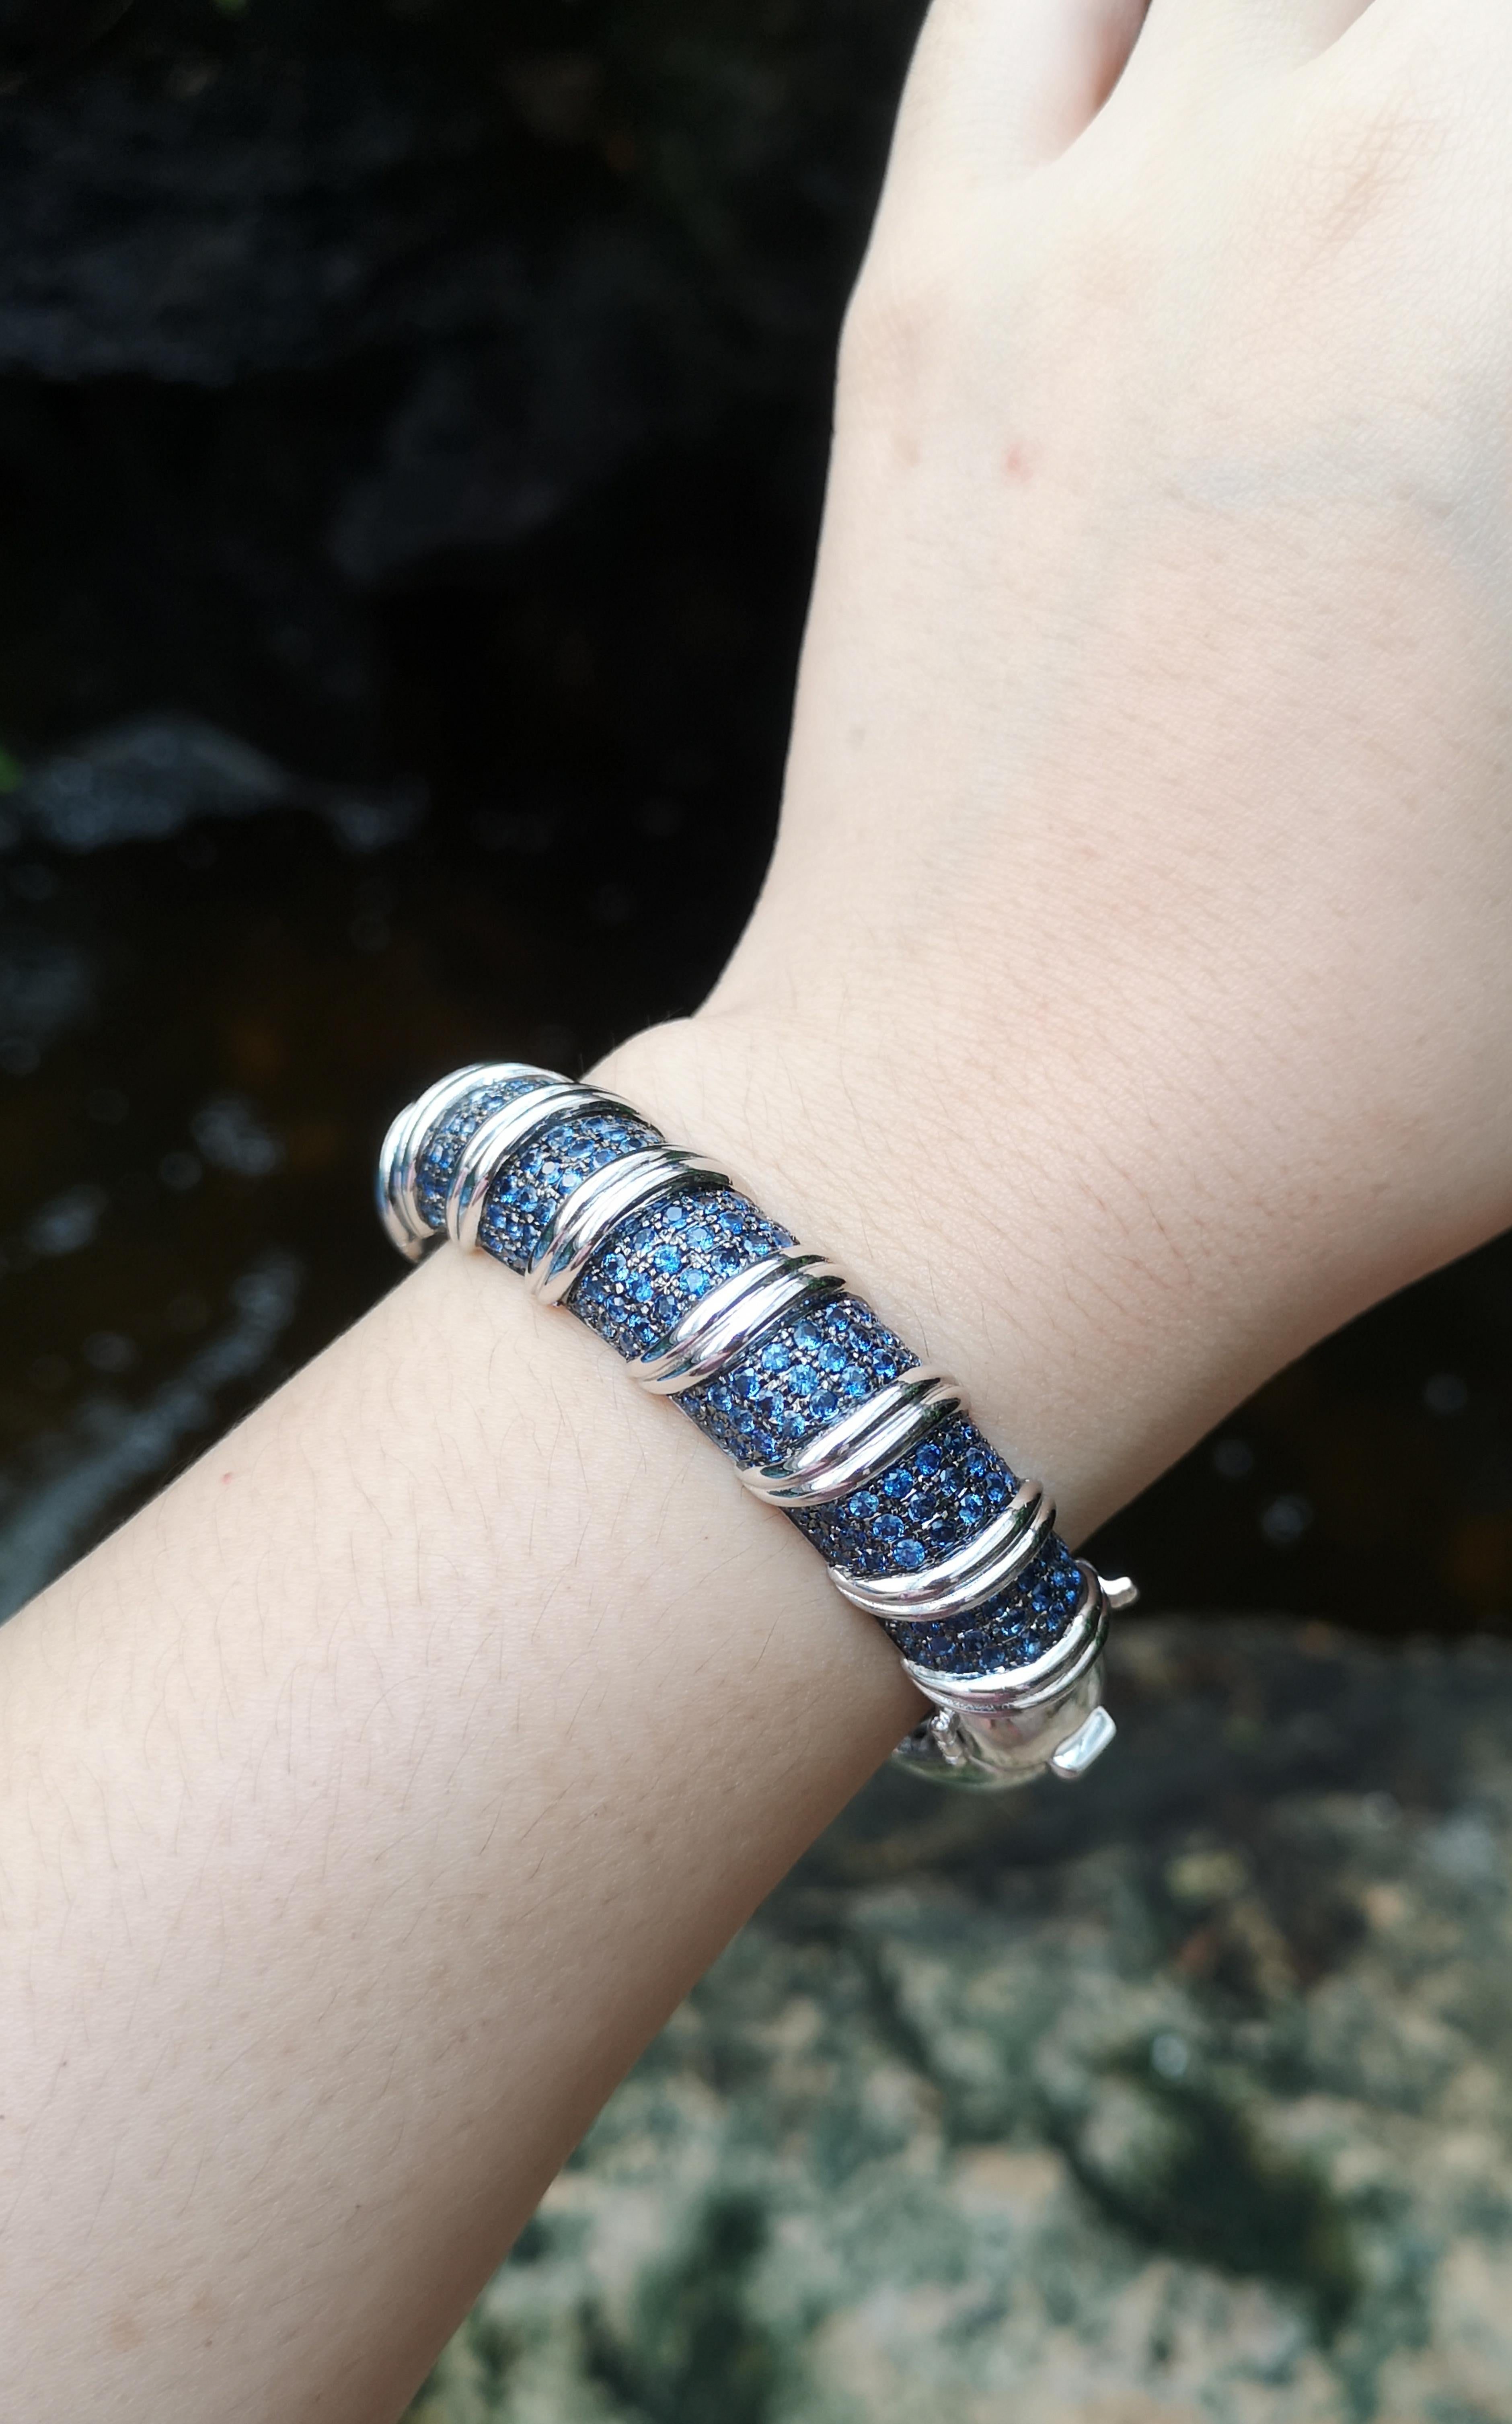 Blue Sapphire 6.18 carats Bangle set in Silver Settings

Diameter:  6.7 cm 
Length: 1.5 cm
Total Weight: 60.22 grams

*Please note that the silver setting is plated with rhodium to promote shine and help prevent oxidation.  However, with the nature